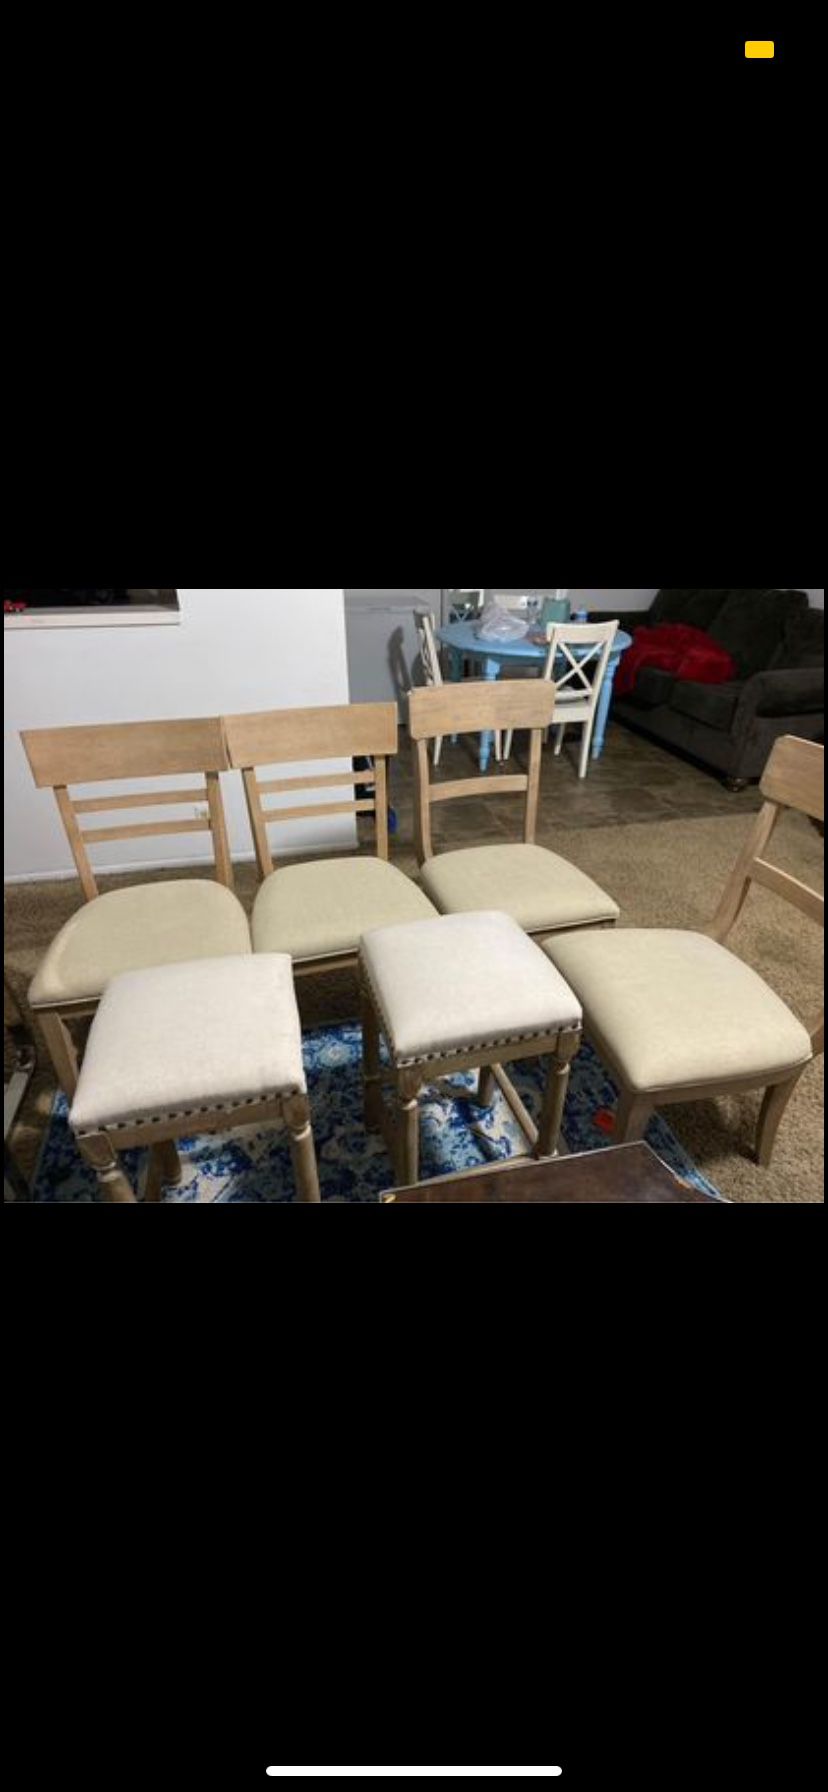 4 chairs and 2 little barstools . Total 6 pieces. Like new